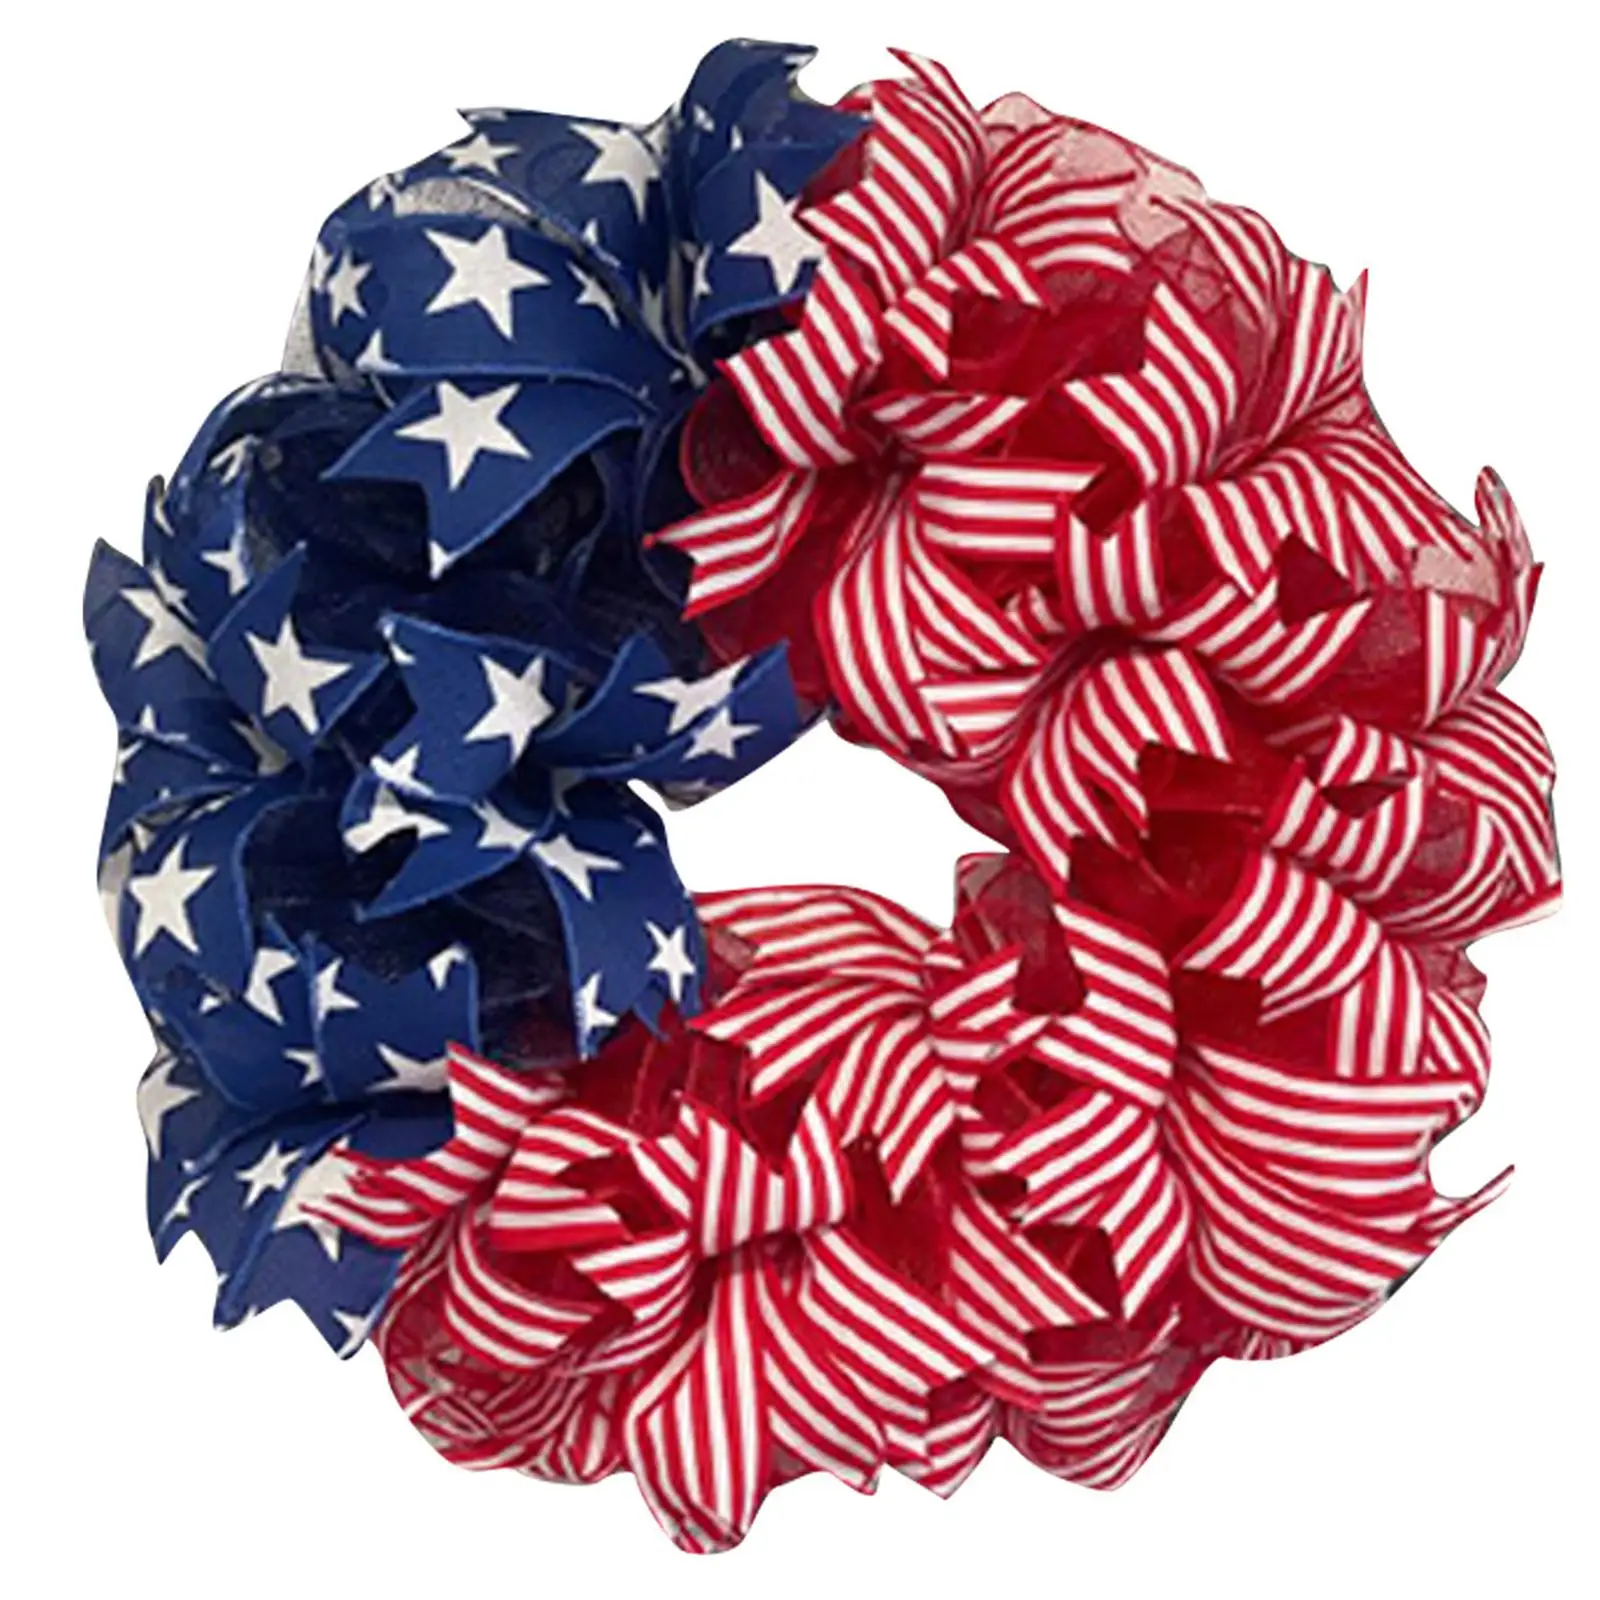 30cm Front Door Wreath Independence Day Memorial Day Red White Blue Patriotic Garland for Indoor Wall Home Spring Decoration